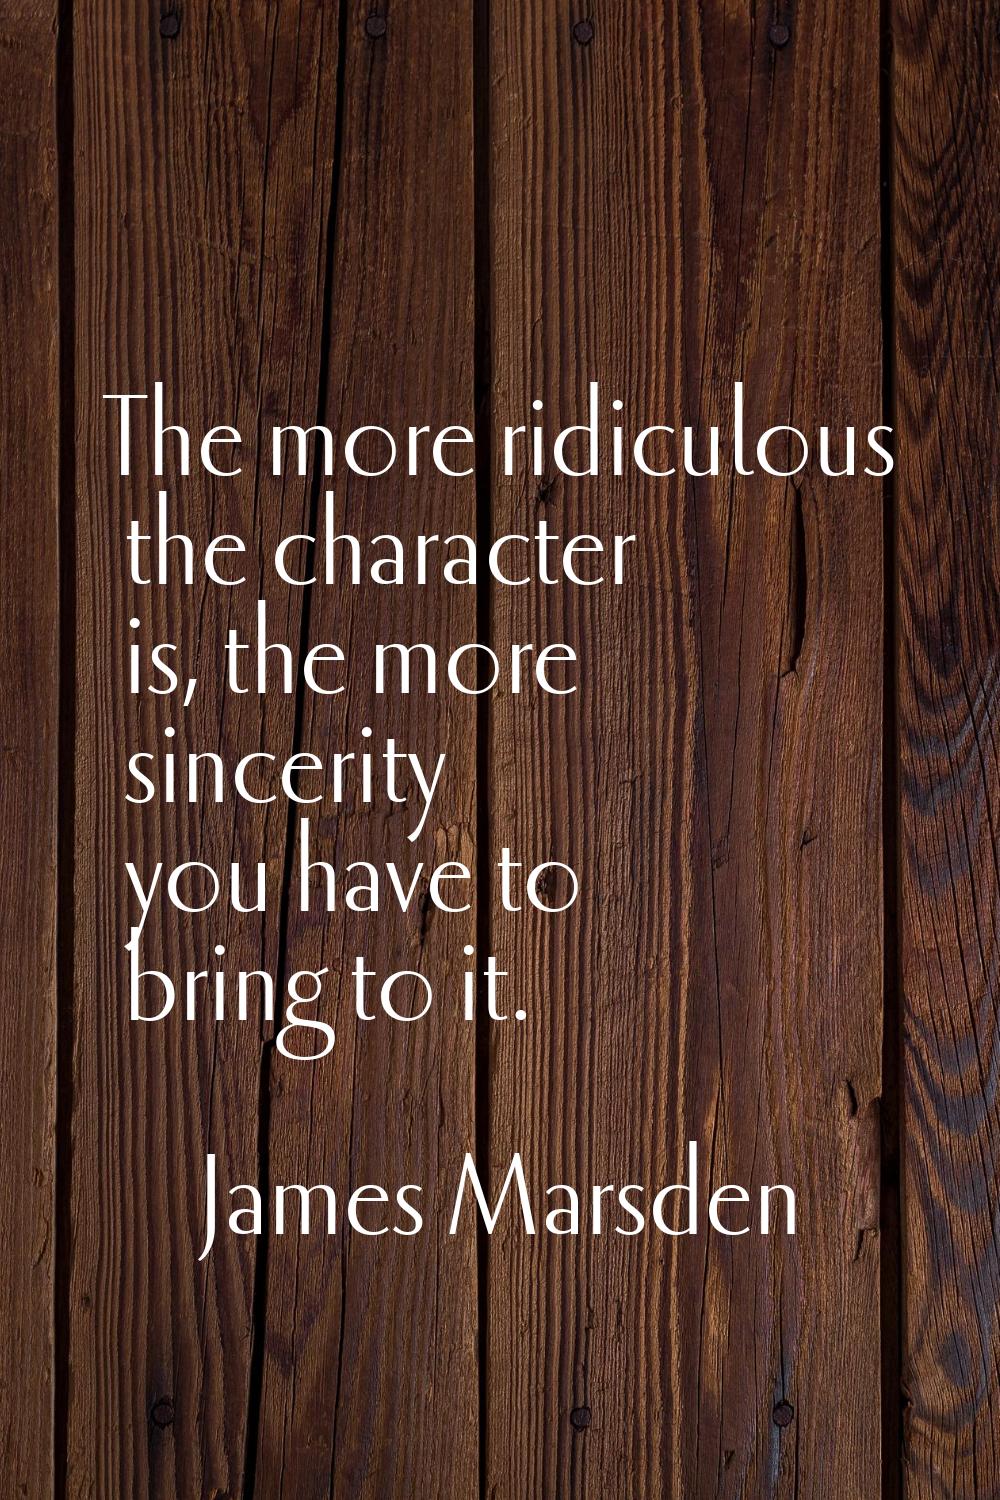 The more ridiculous the character is, the more sincerity you have to bring to it.